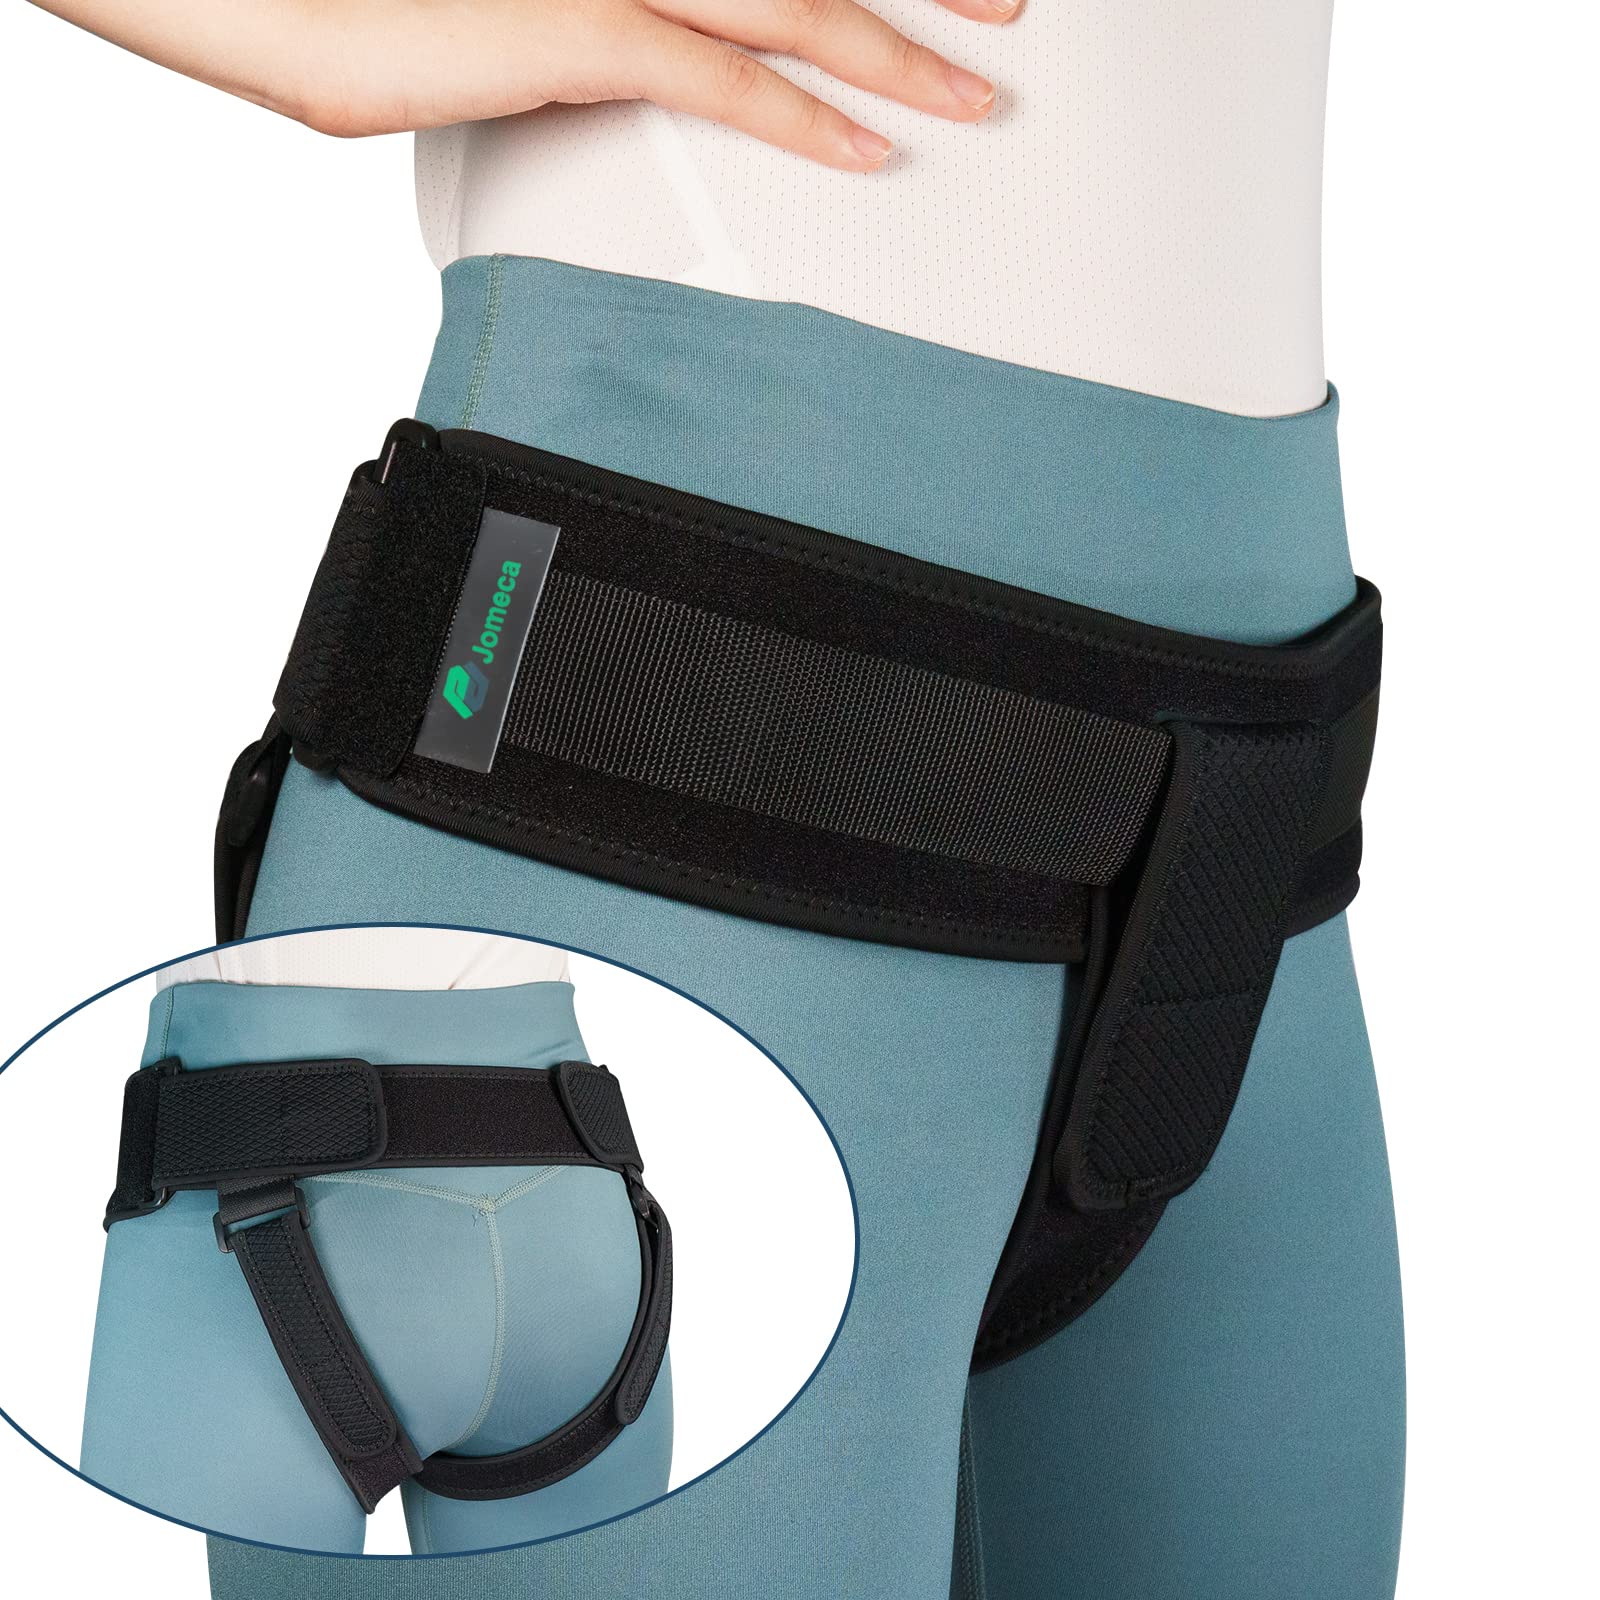 10.4. The Fembrace support device for pelvic organ prolapse